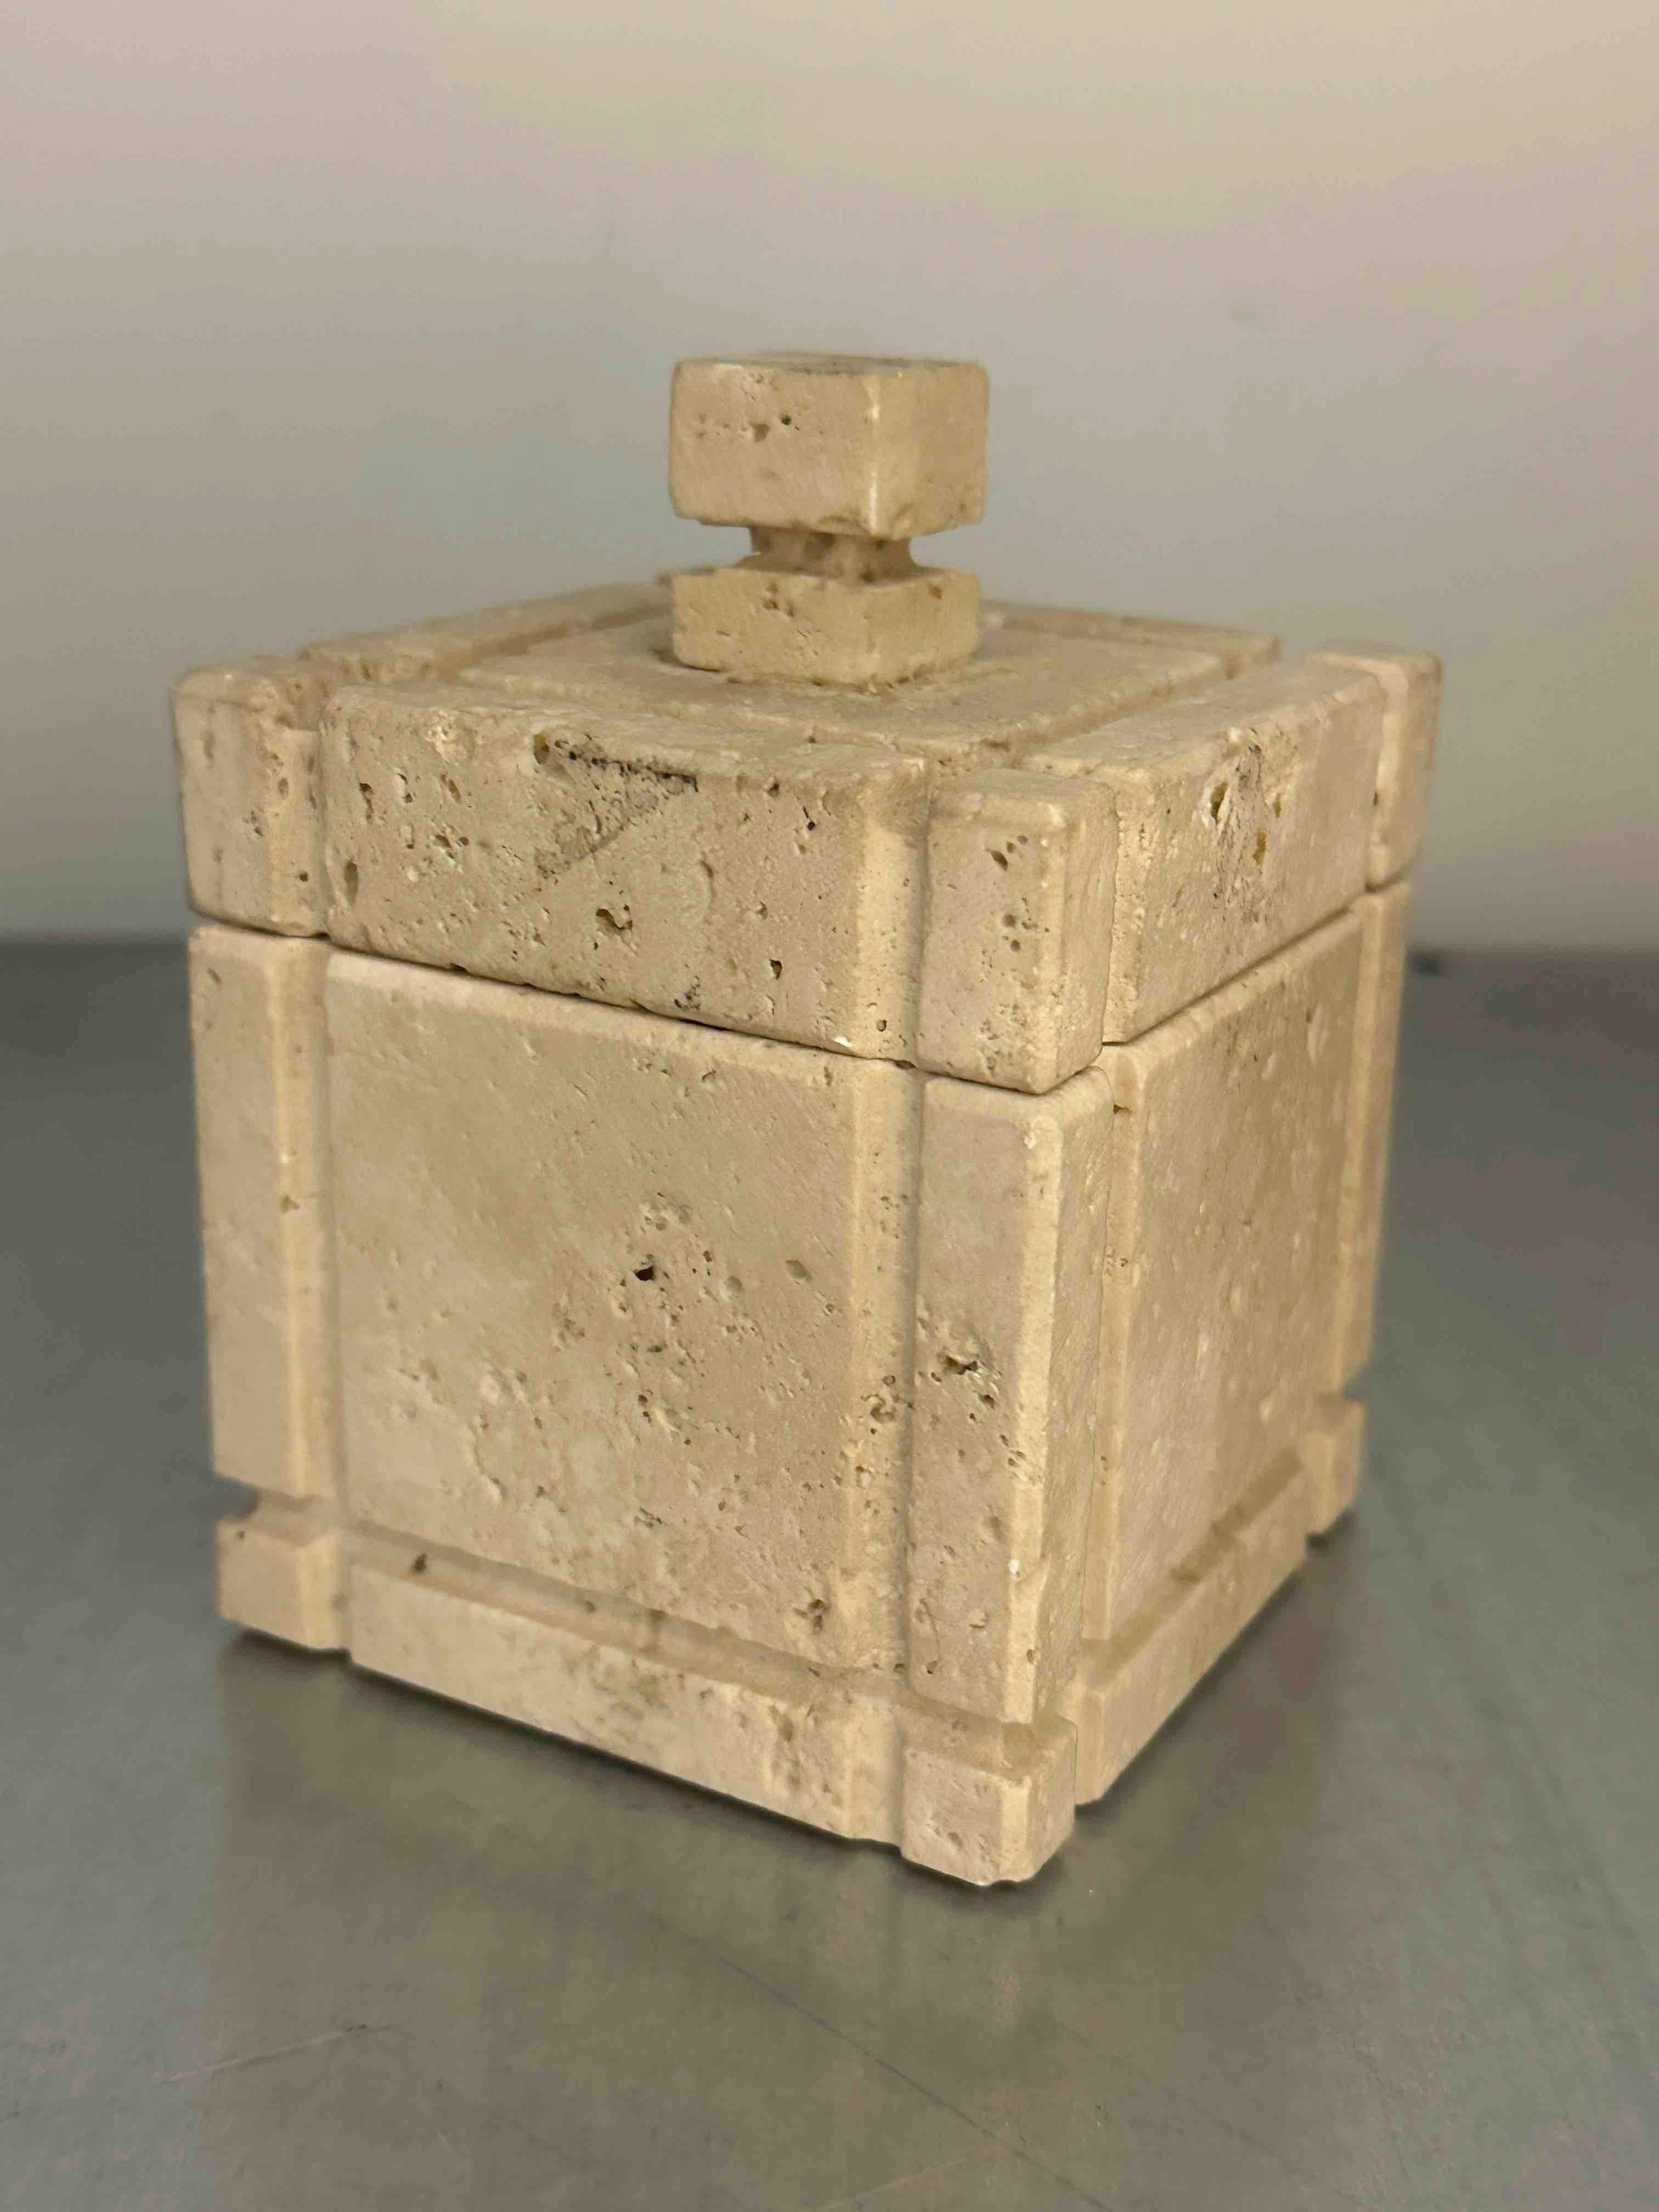 Midcentury Travertine Marble Italian Box Catchall by Fratelli Manelli, 1970s For Sale 4